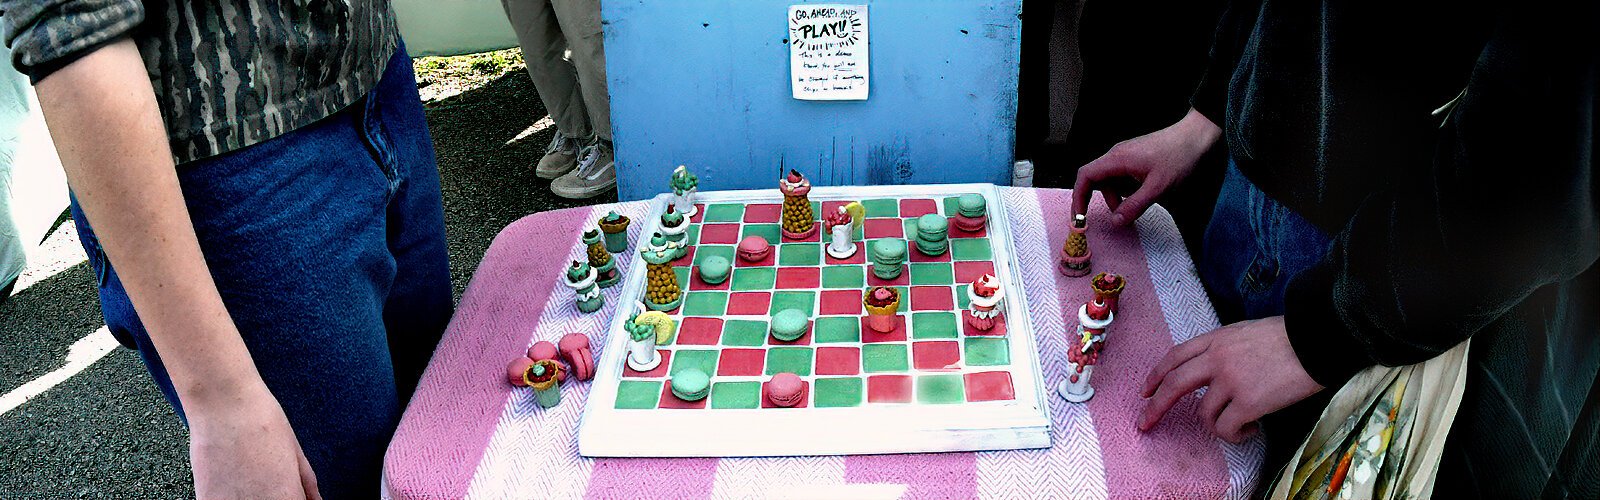 With a posted note to “Go ahead and play!! You will not be charged if anything chips or breaks," it’s hard to resist this attractive demo chess set made of ceramic macarons and cupcakes.